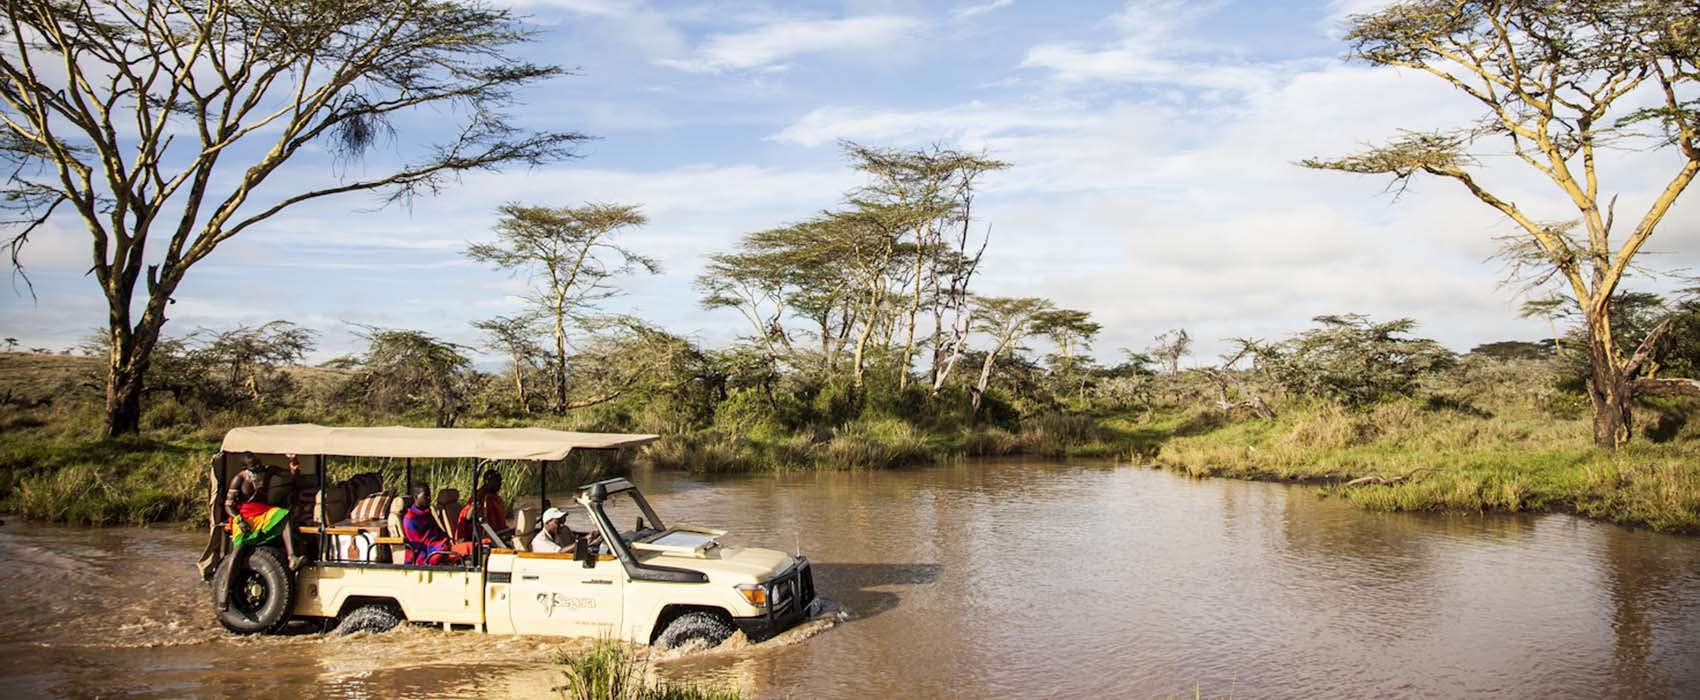 africa safaris for four wheel driving in